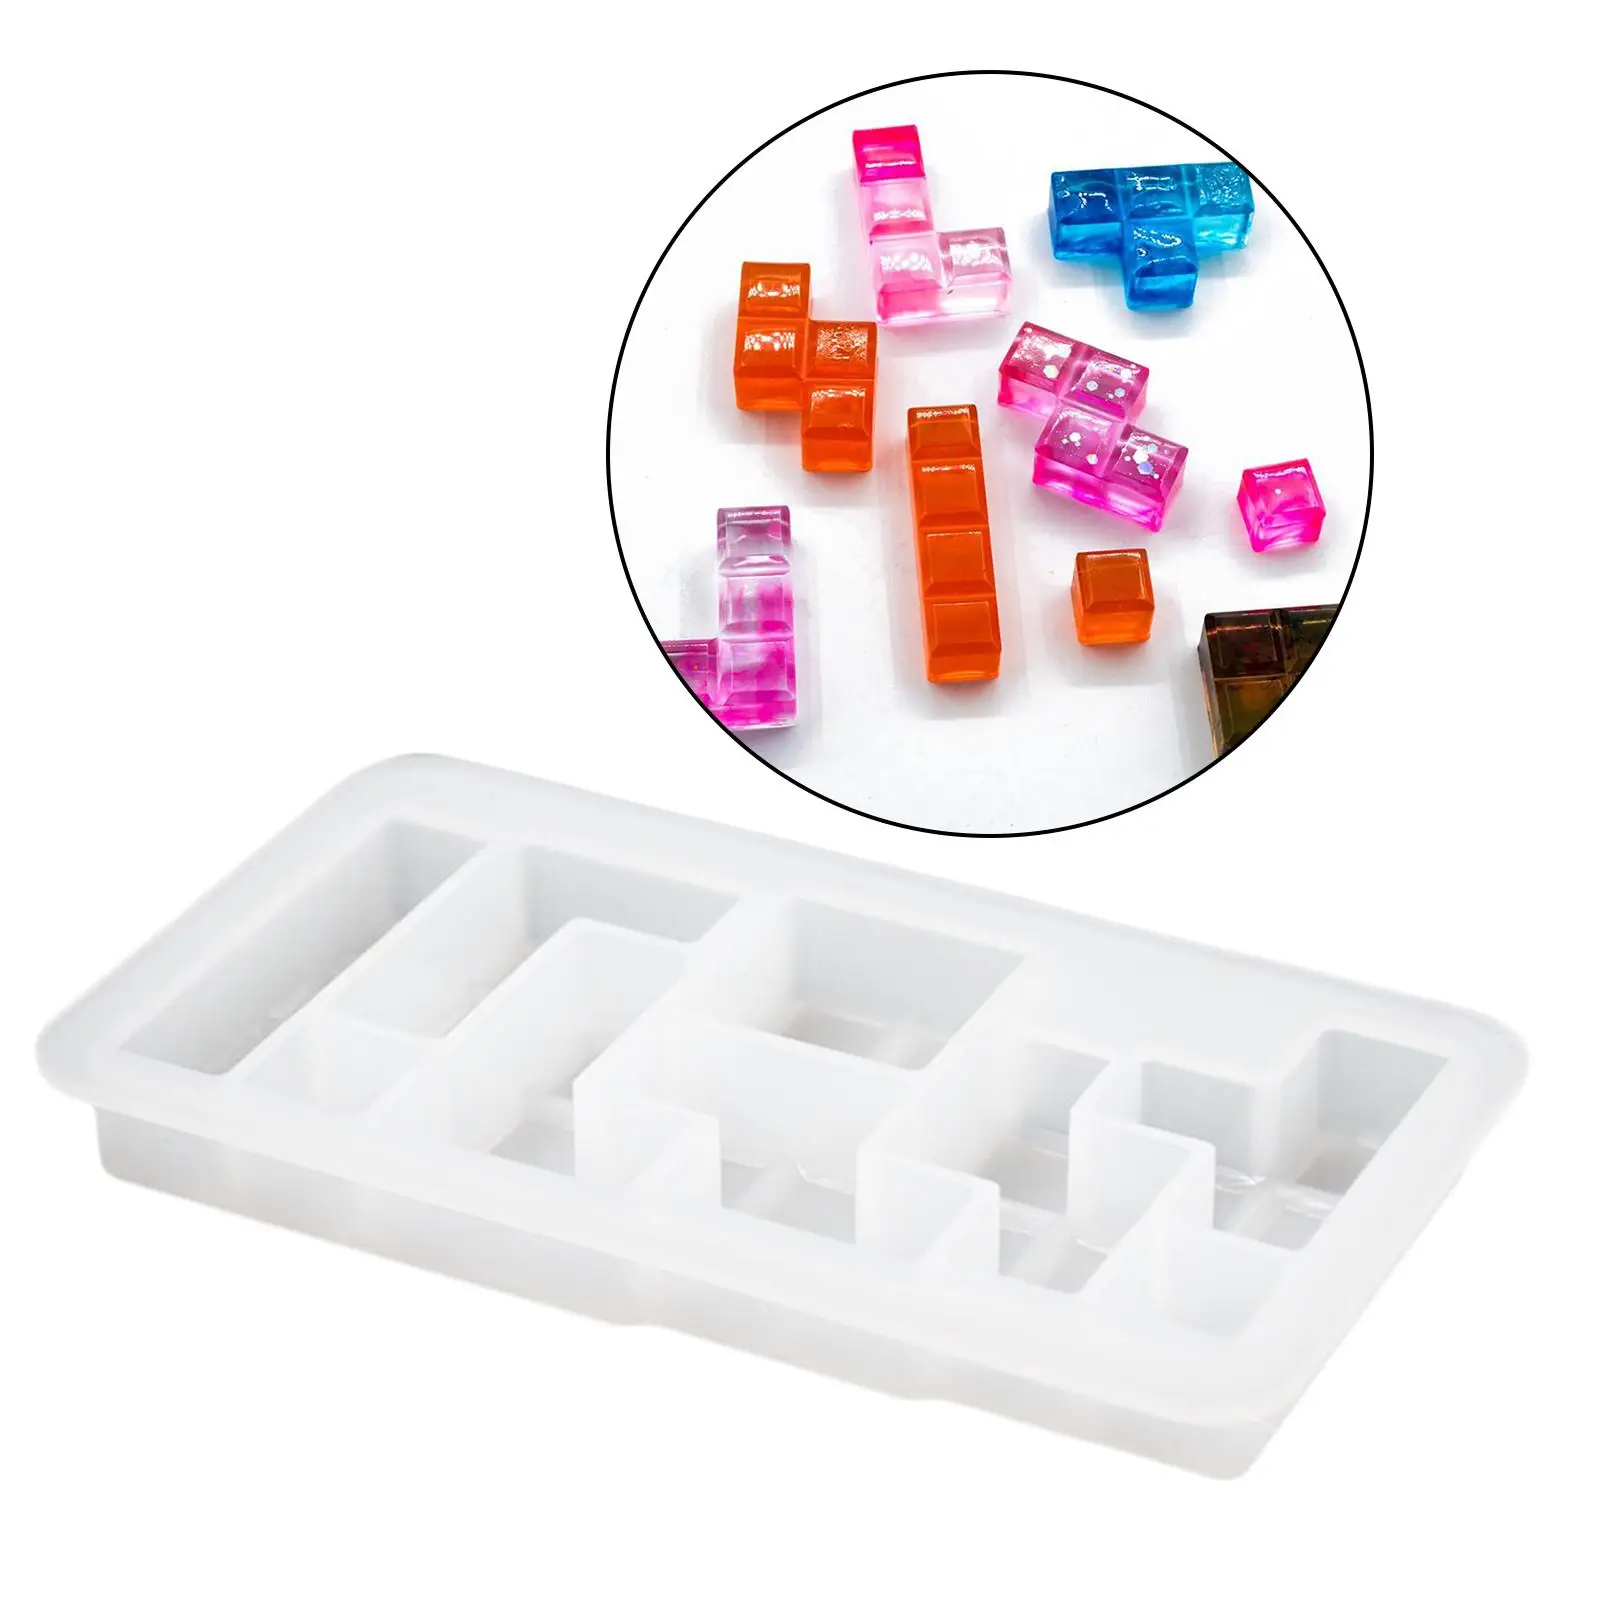 Handmade Resin Cubes  Trays, Silicone Cube Toy Socket Craft , Storage Box Epoxy Crafts toy for kids 